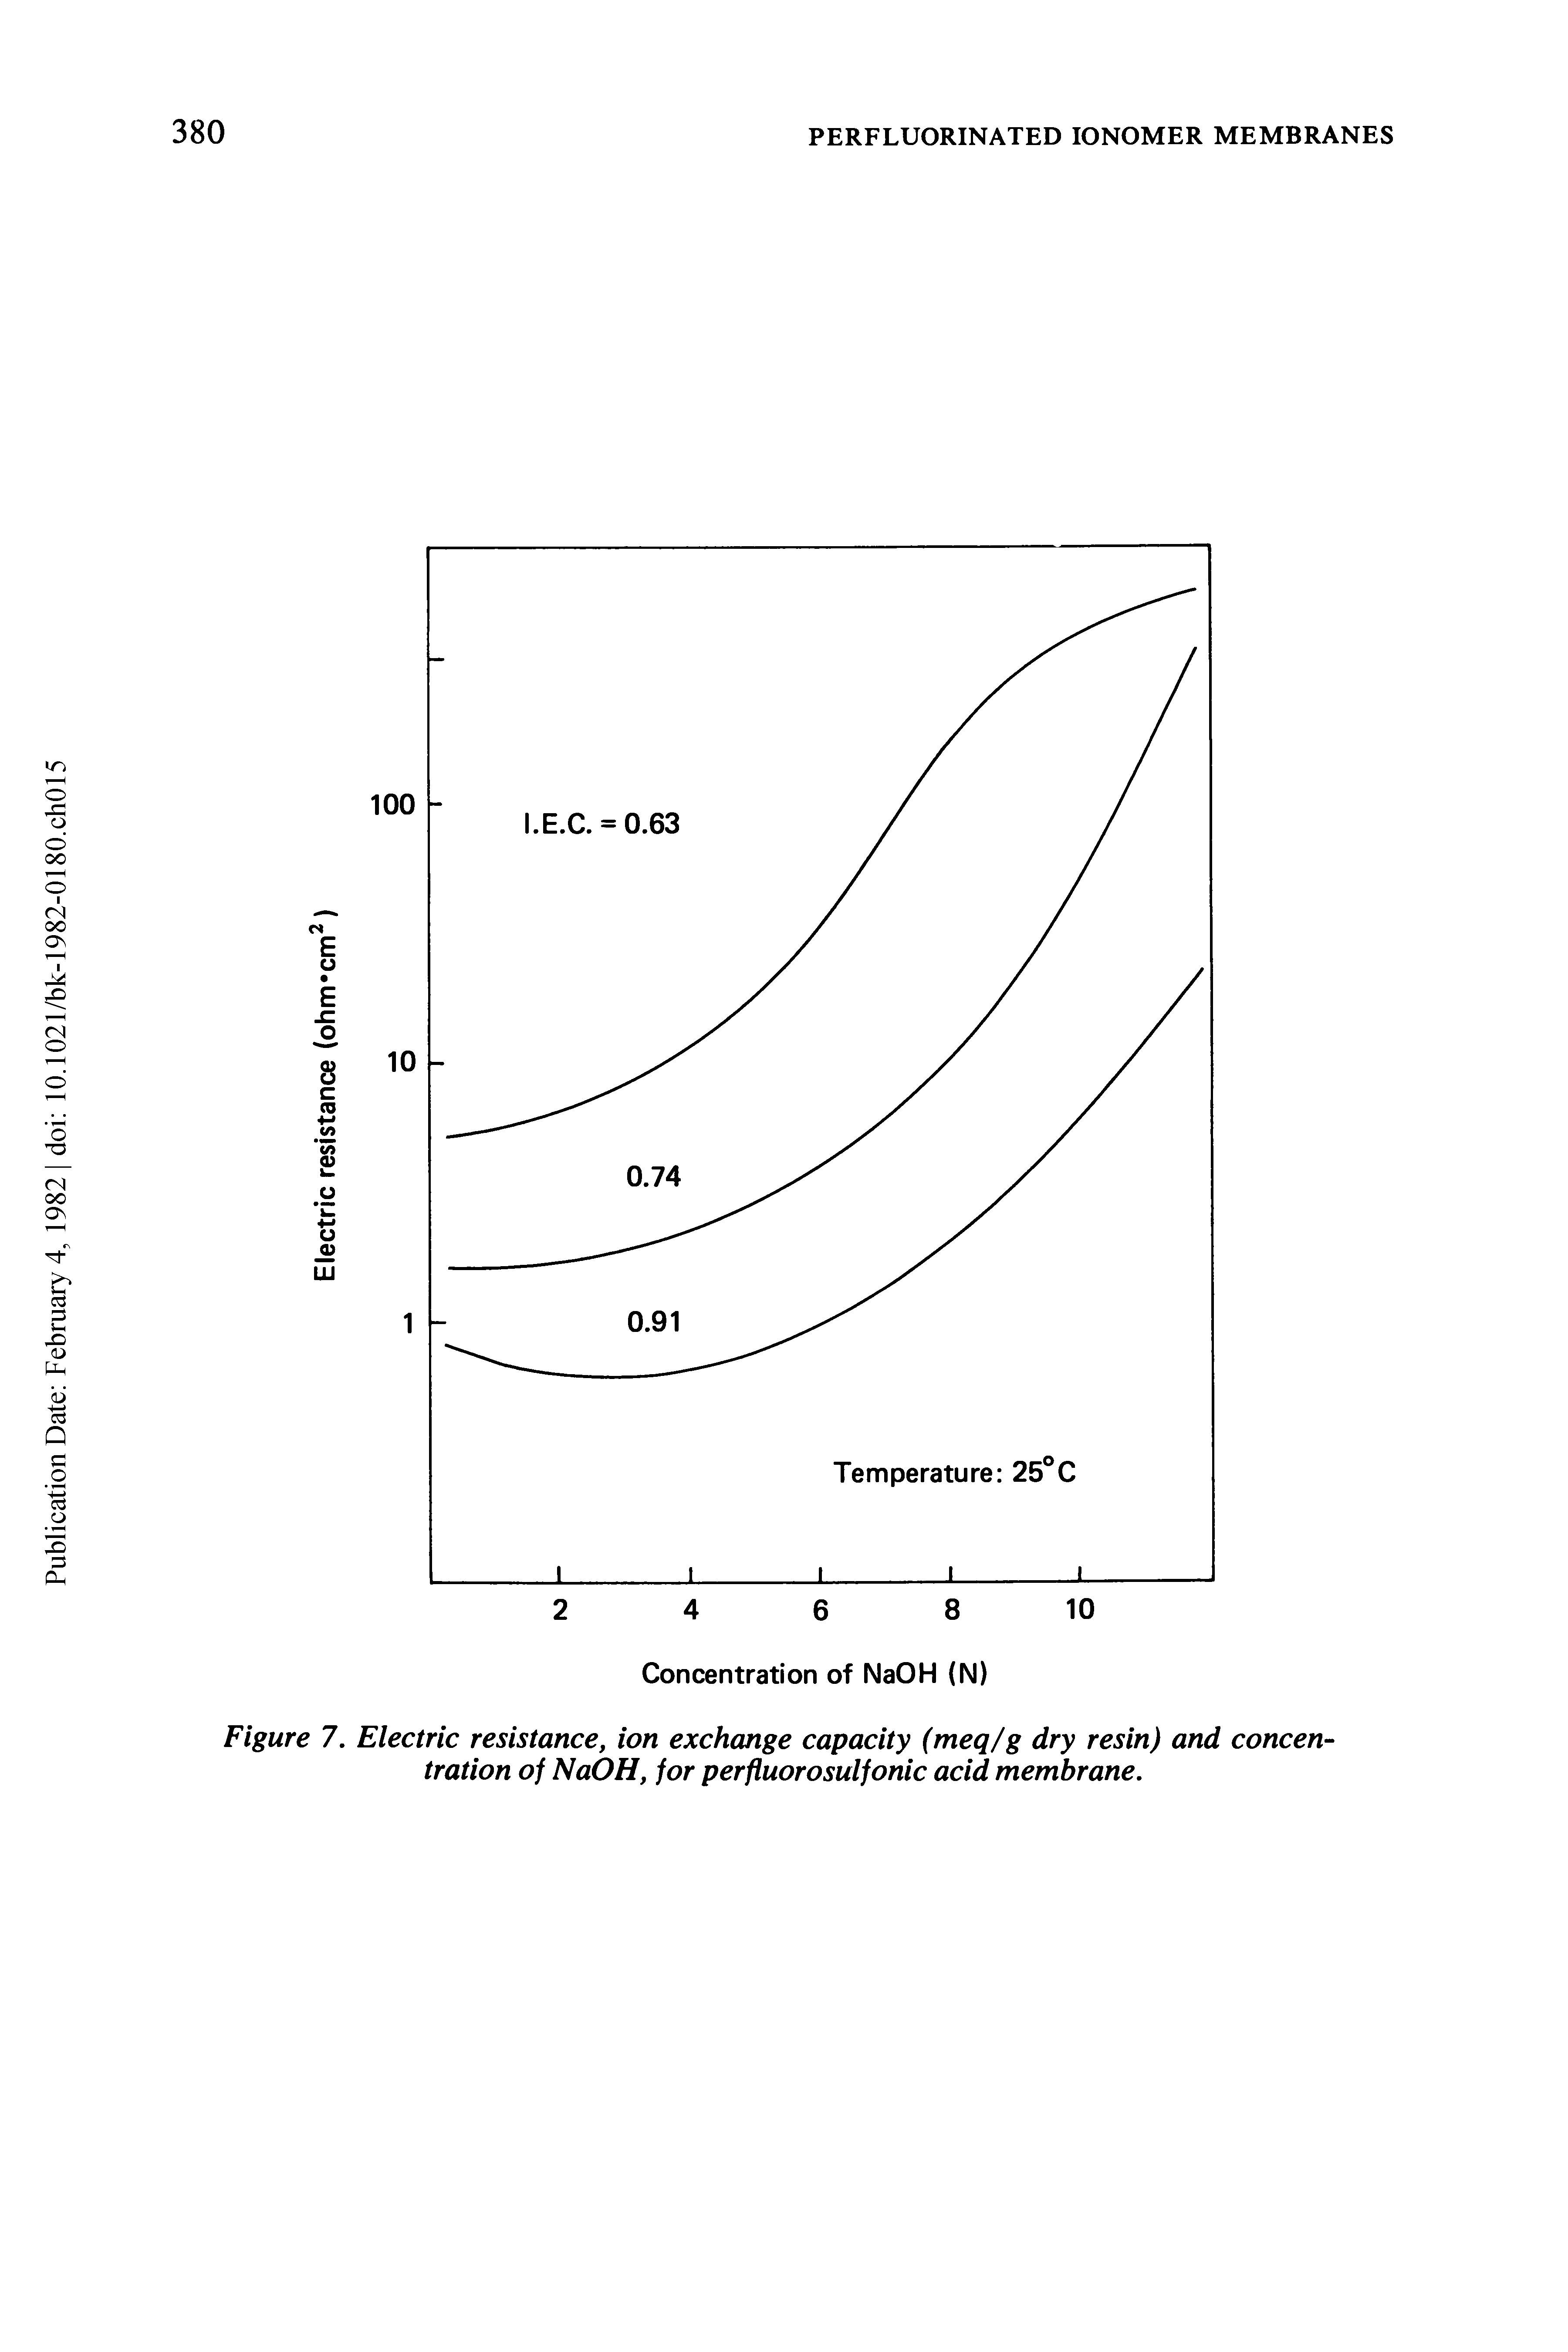 Figure 7. Electric resistance, ion exchange capacity (meq/g dry resin) and concentration of NaOH, for perfluorosulfonic acid membrane.